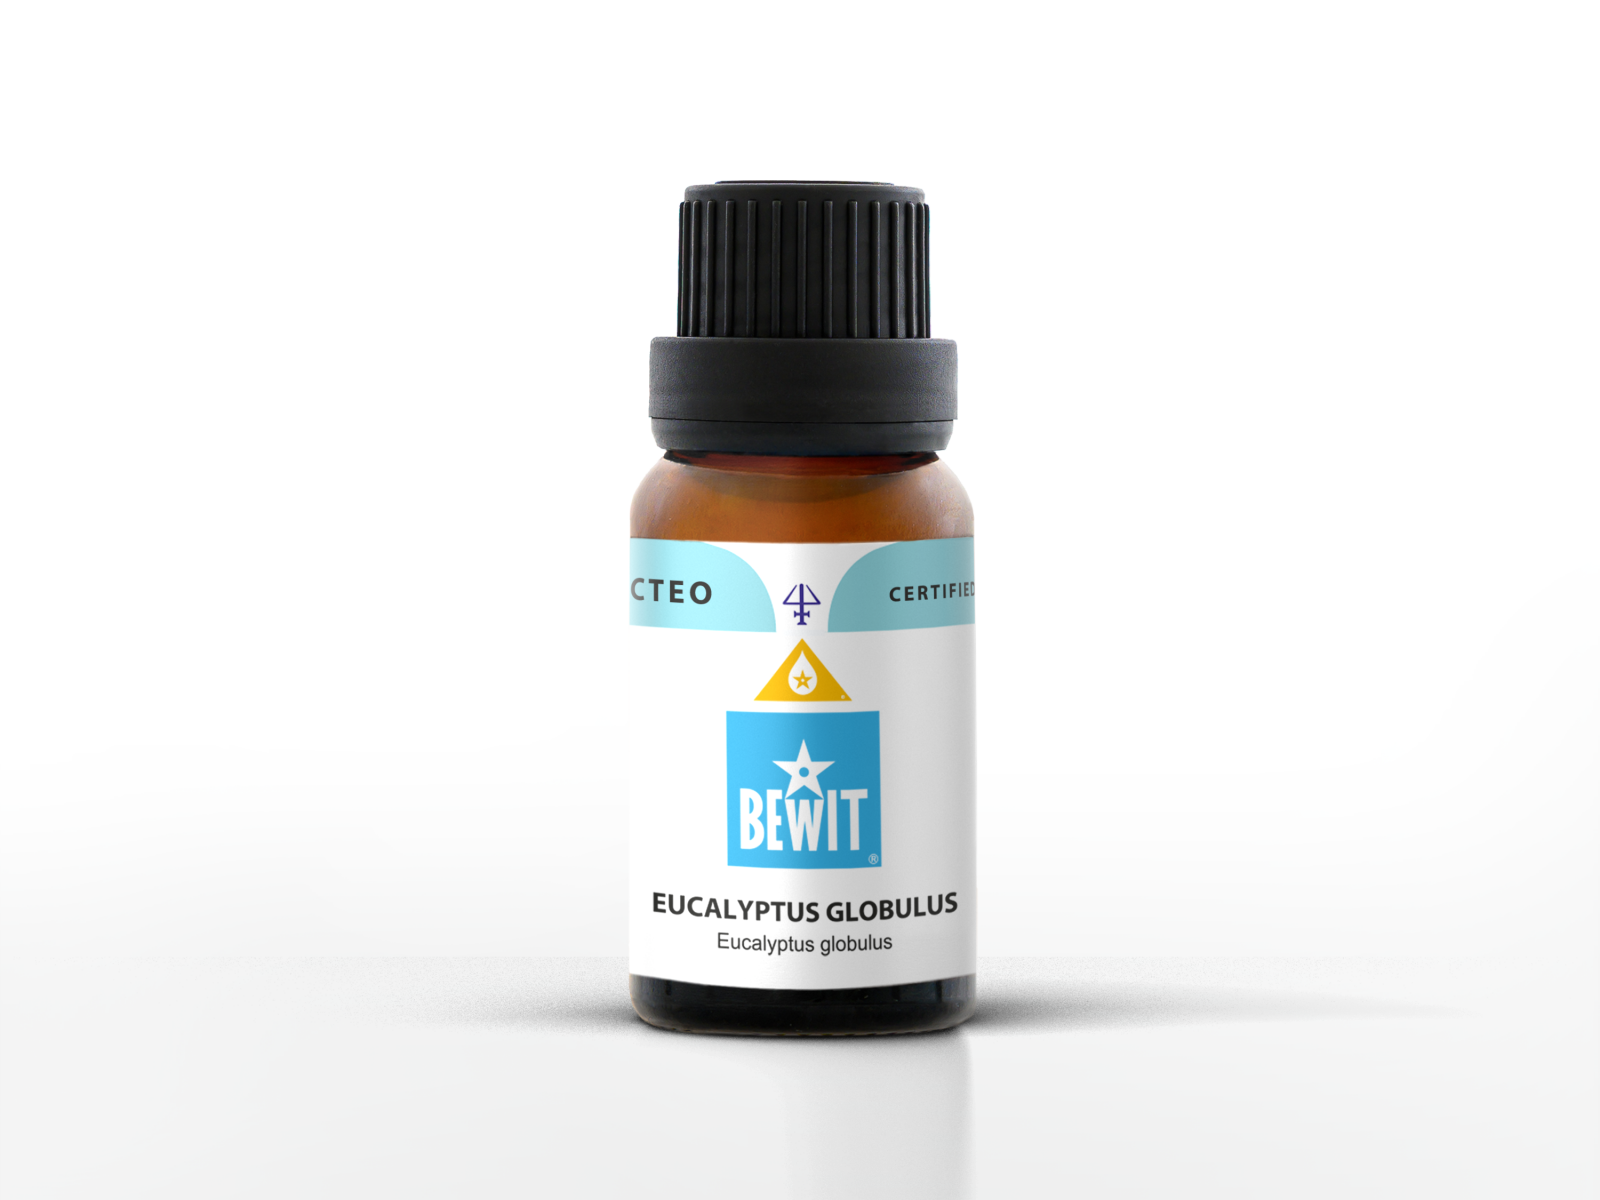 BEWIT Eucalyptus globulus - This is a 100% pure essential oil - 3